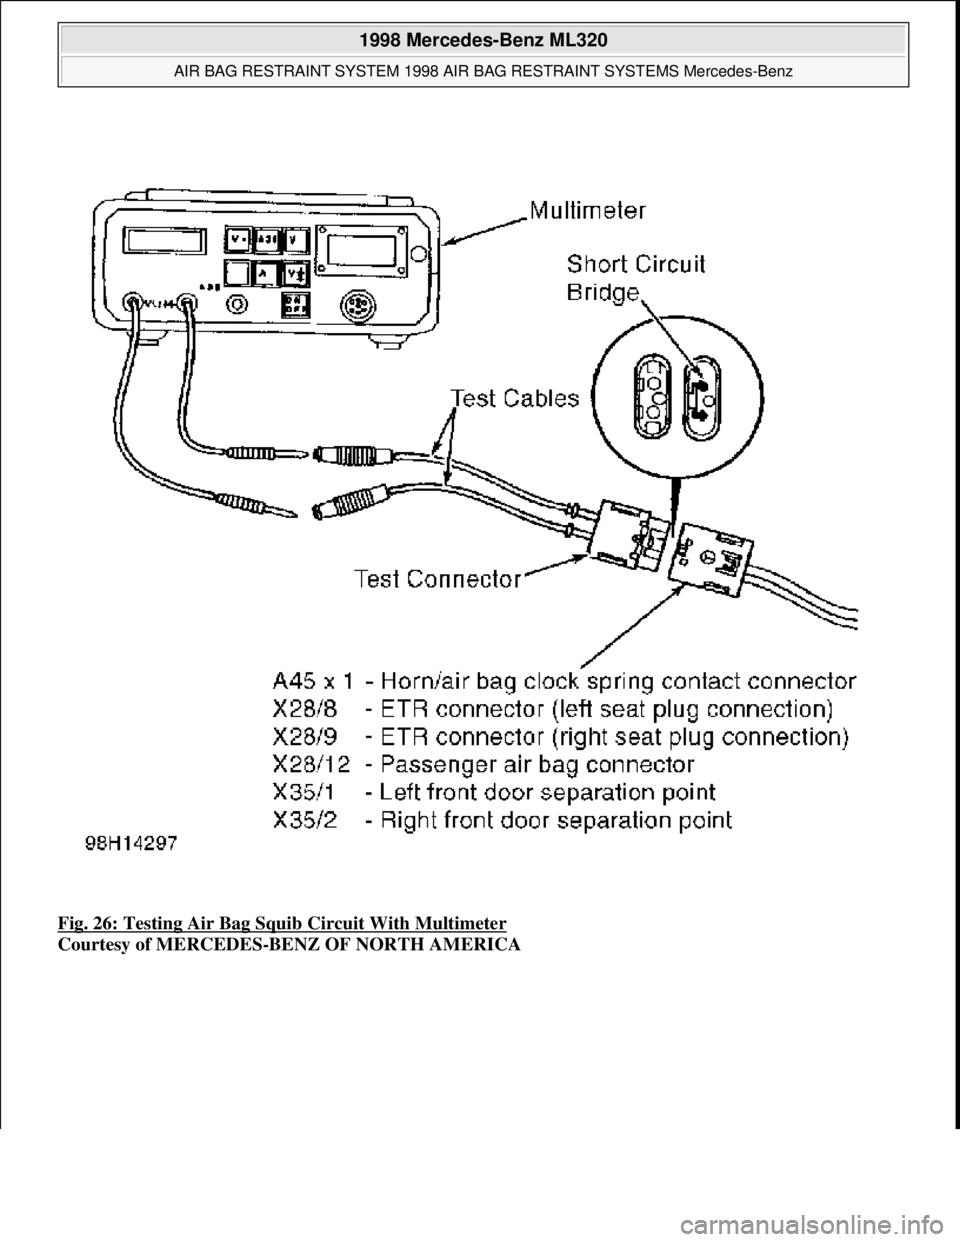 MERCEDES-BENZ ML350 1997  Complete Owners Guide Fig. 26: Testing Air Bag Squi b Circuit With Multimeter  
Courtesy of MERCEDES-BENZ OF NORTH AMERICA
 
1998 Mercedes-Benz ML320 
AIR BAG RESTRAINT SYSTEM 1998 AIR   BAG RESTRAINT SYSTEMS Mercedes-Benz